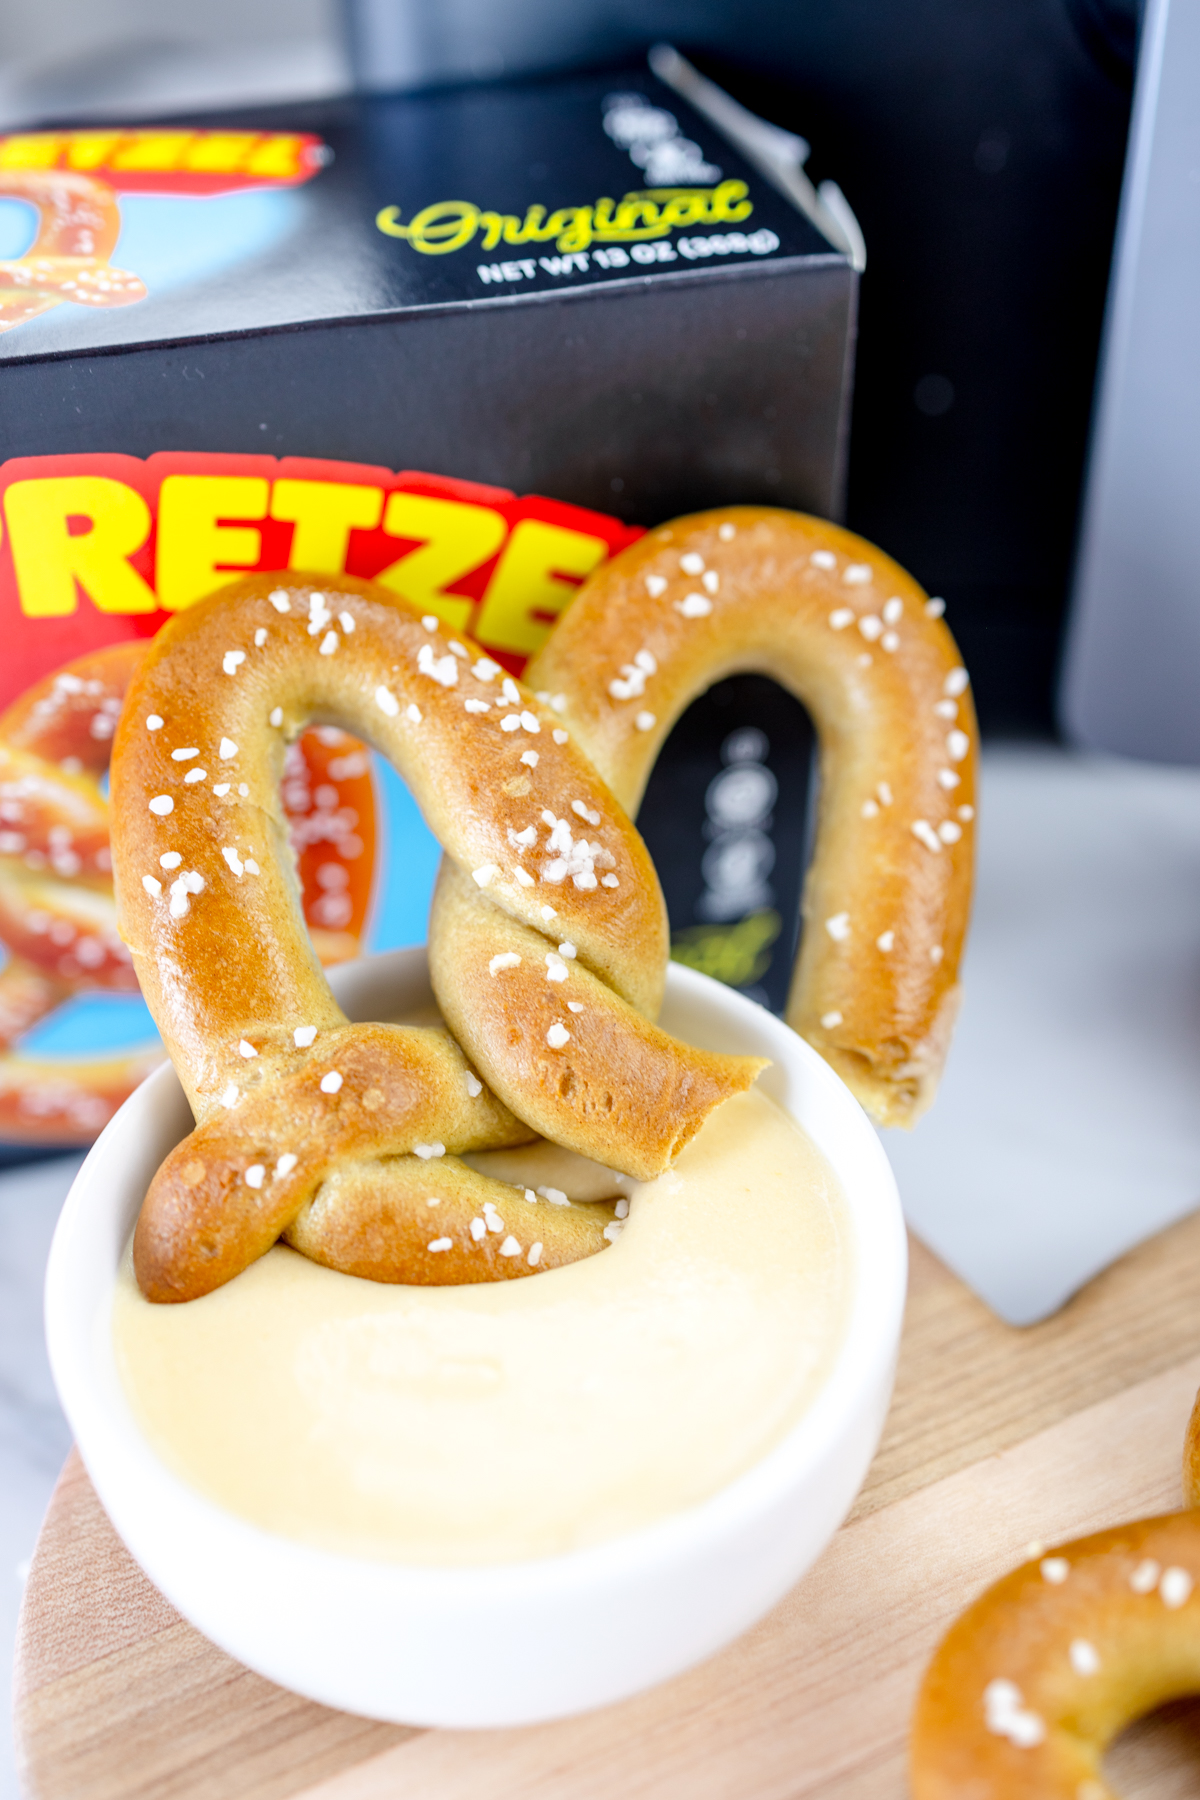 Air-fried pretzel dipped in sauce, with a box of Super Pretzel brand frozen pretzels in the background.